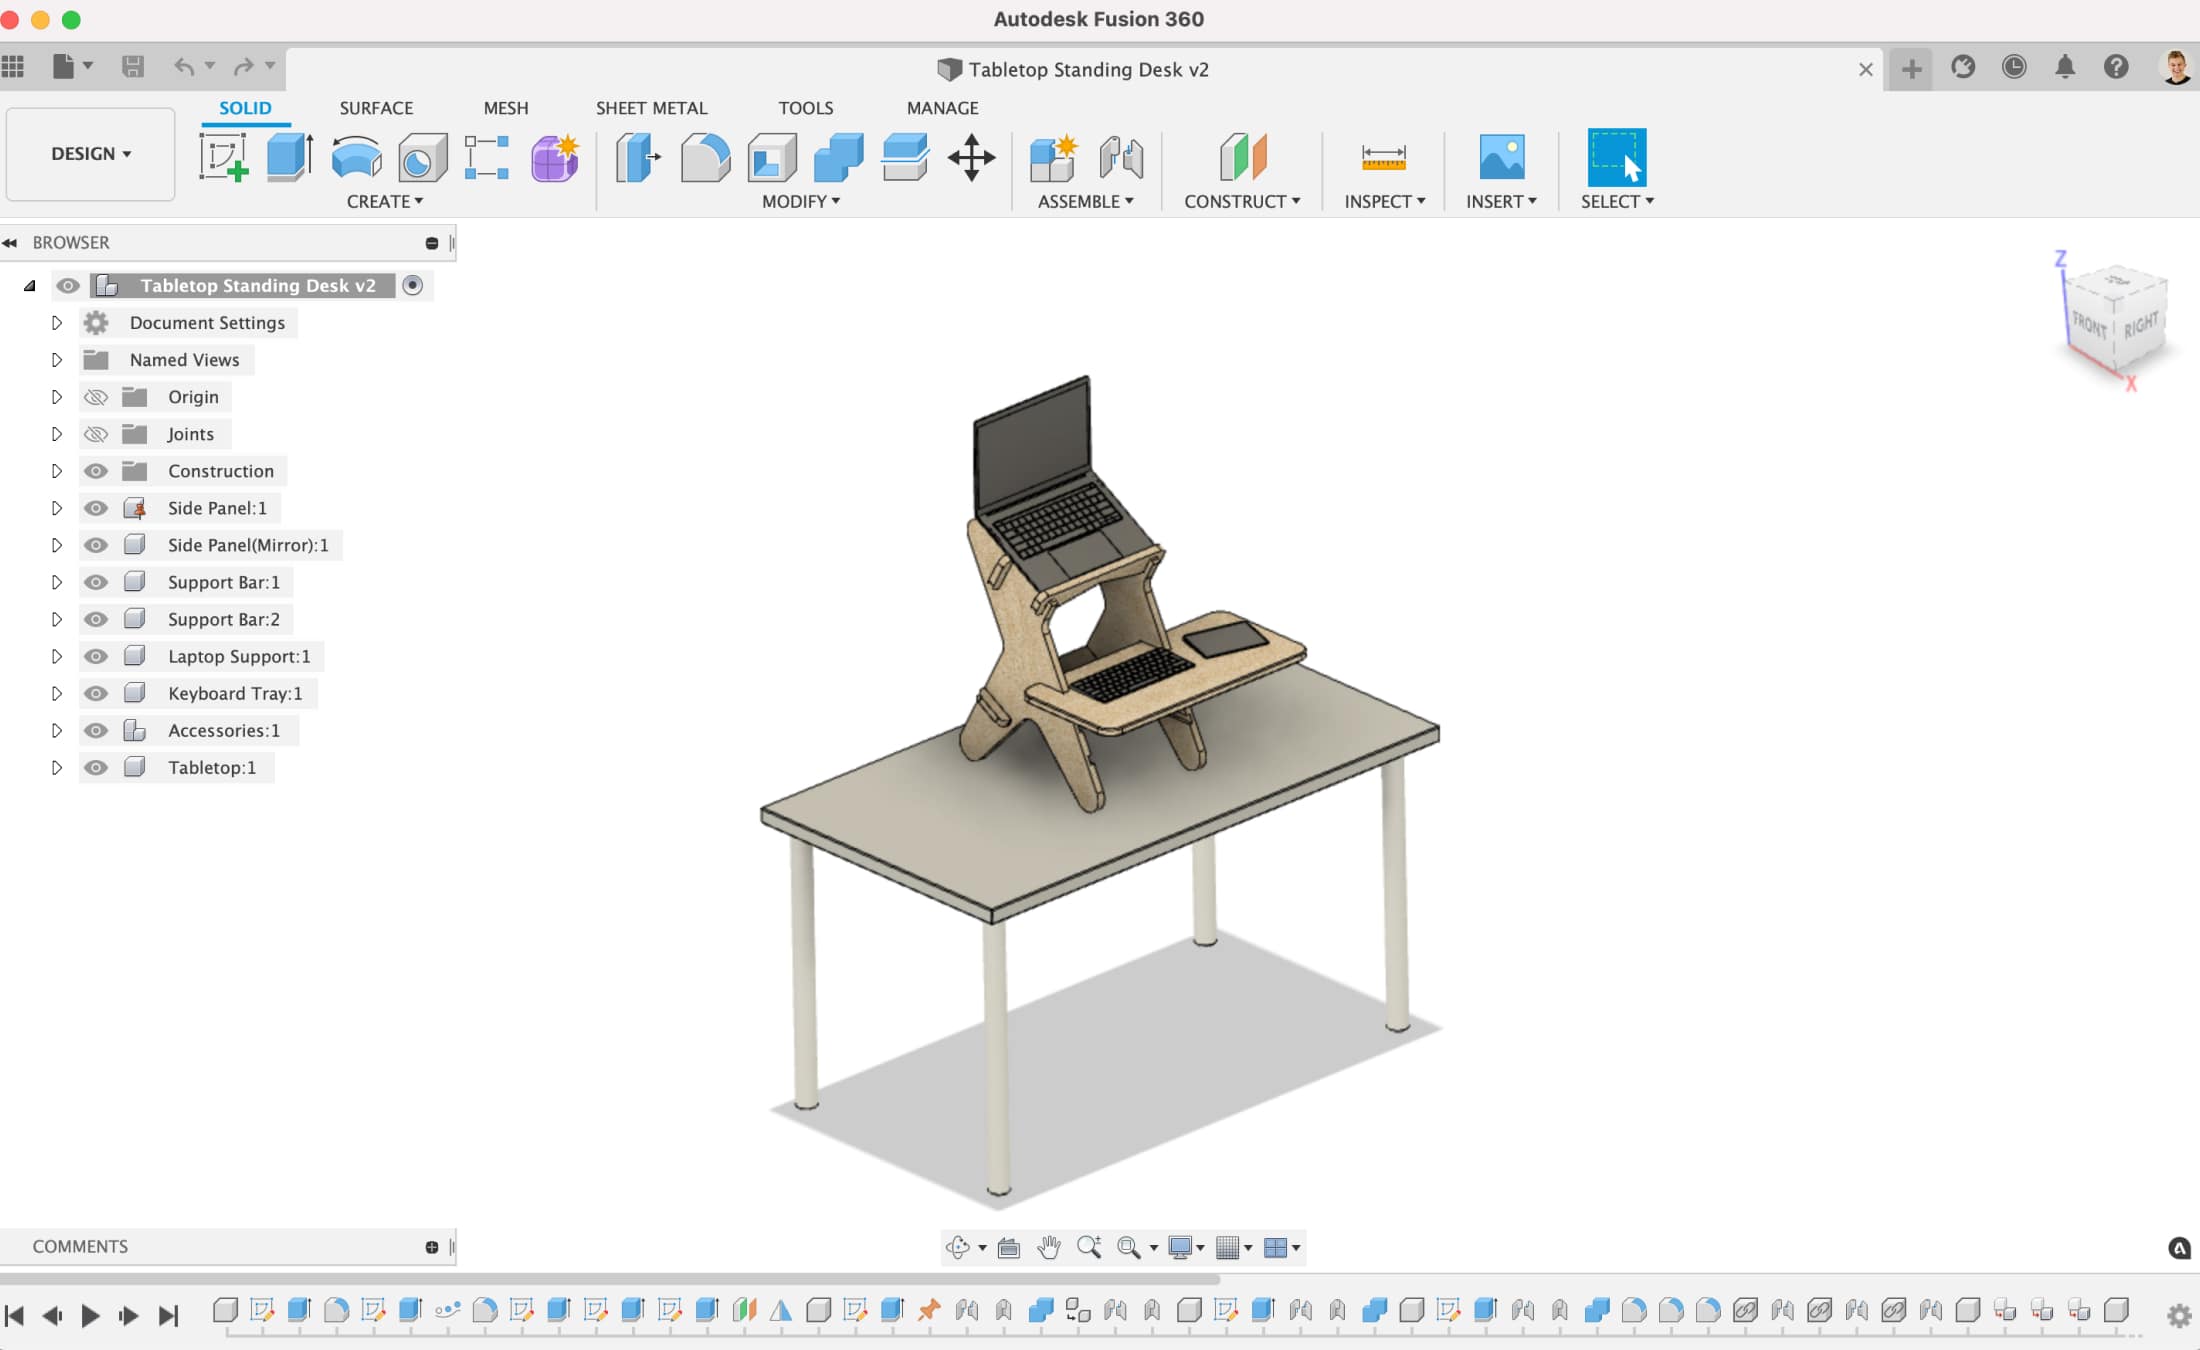 fusion 360 free for hobbyists